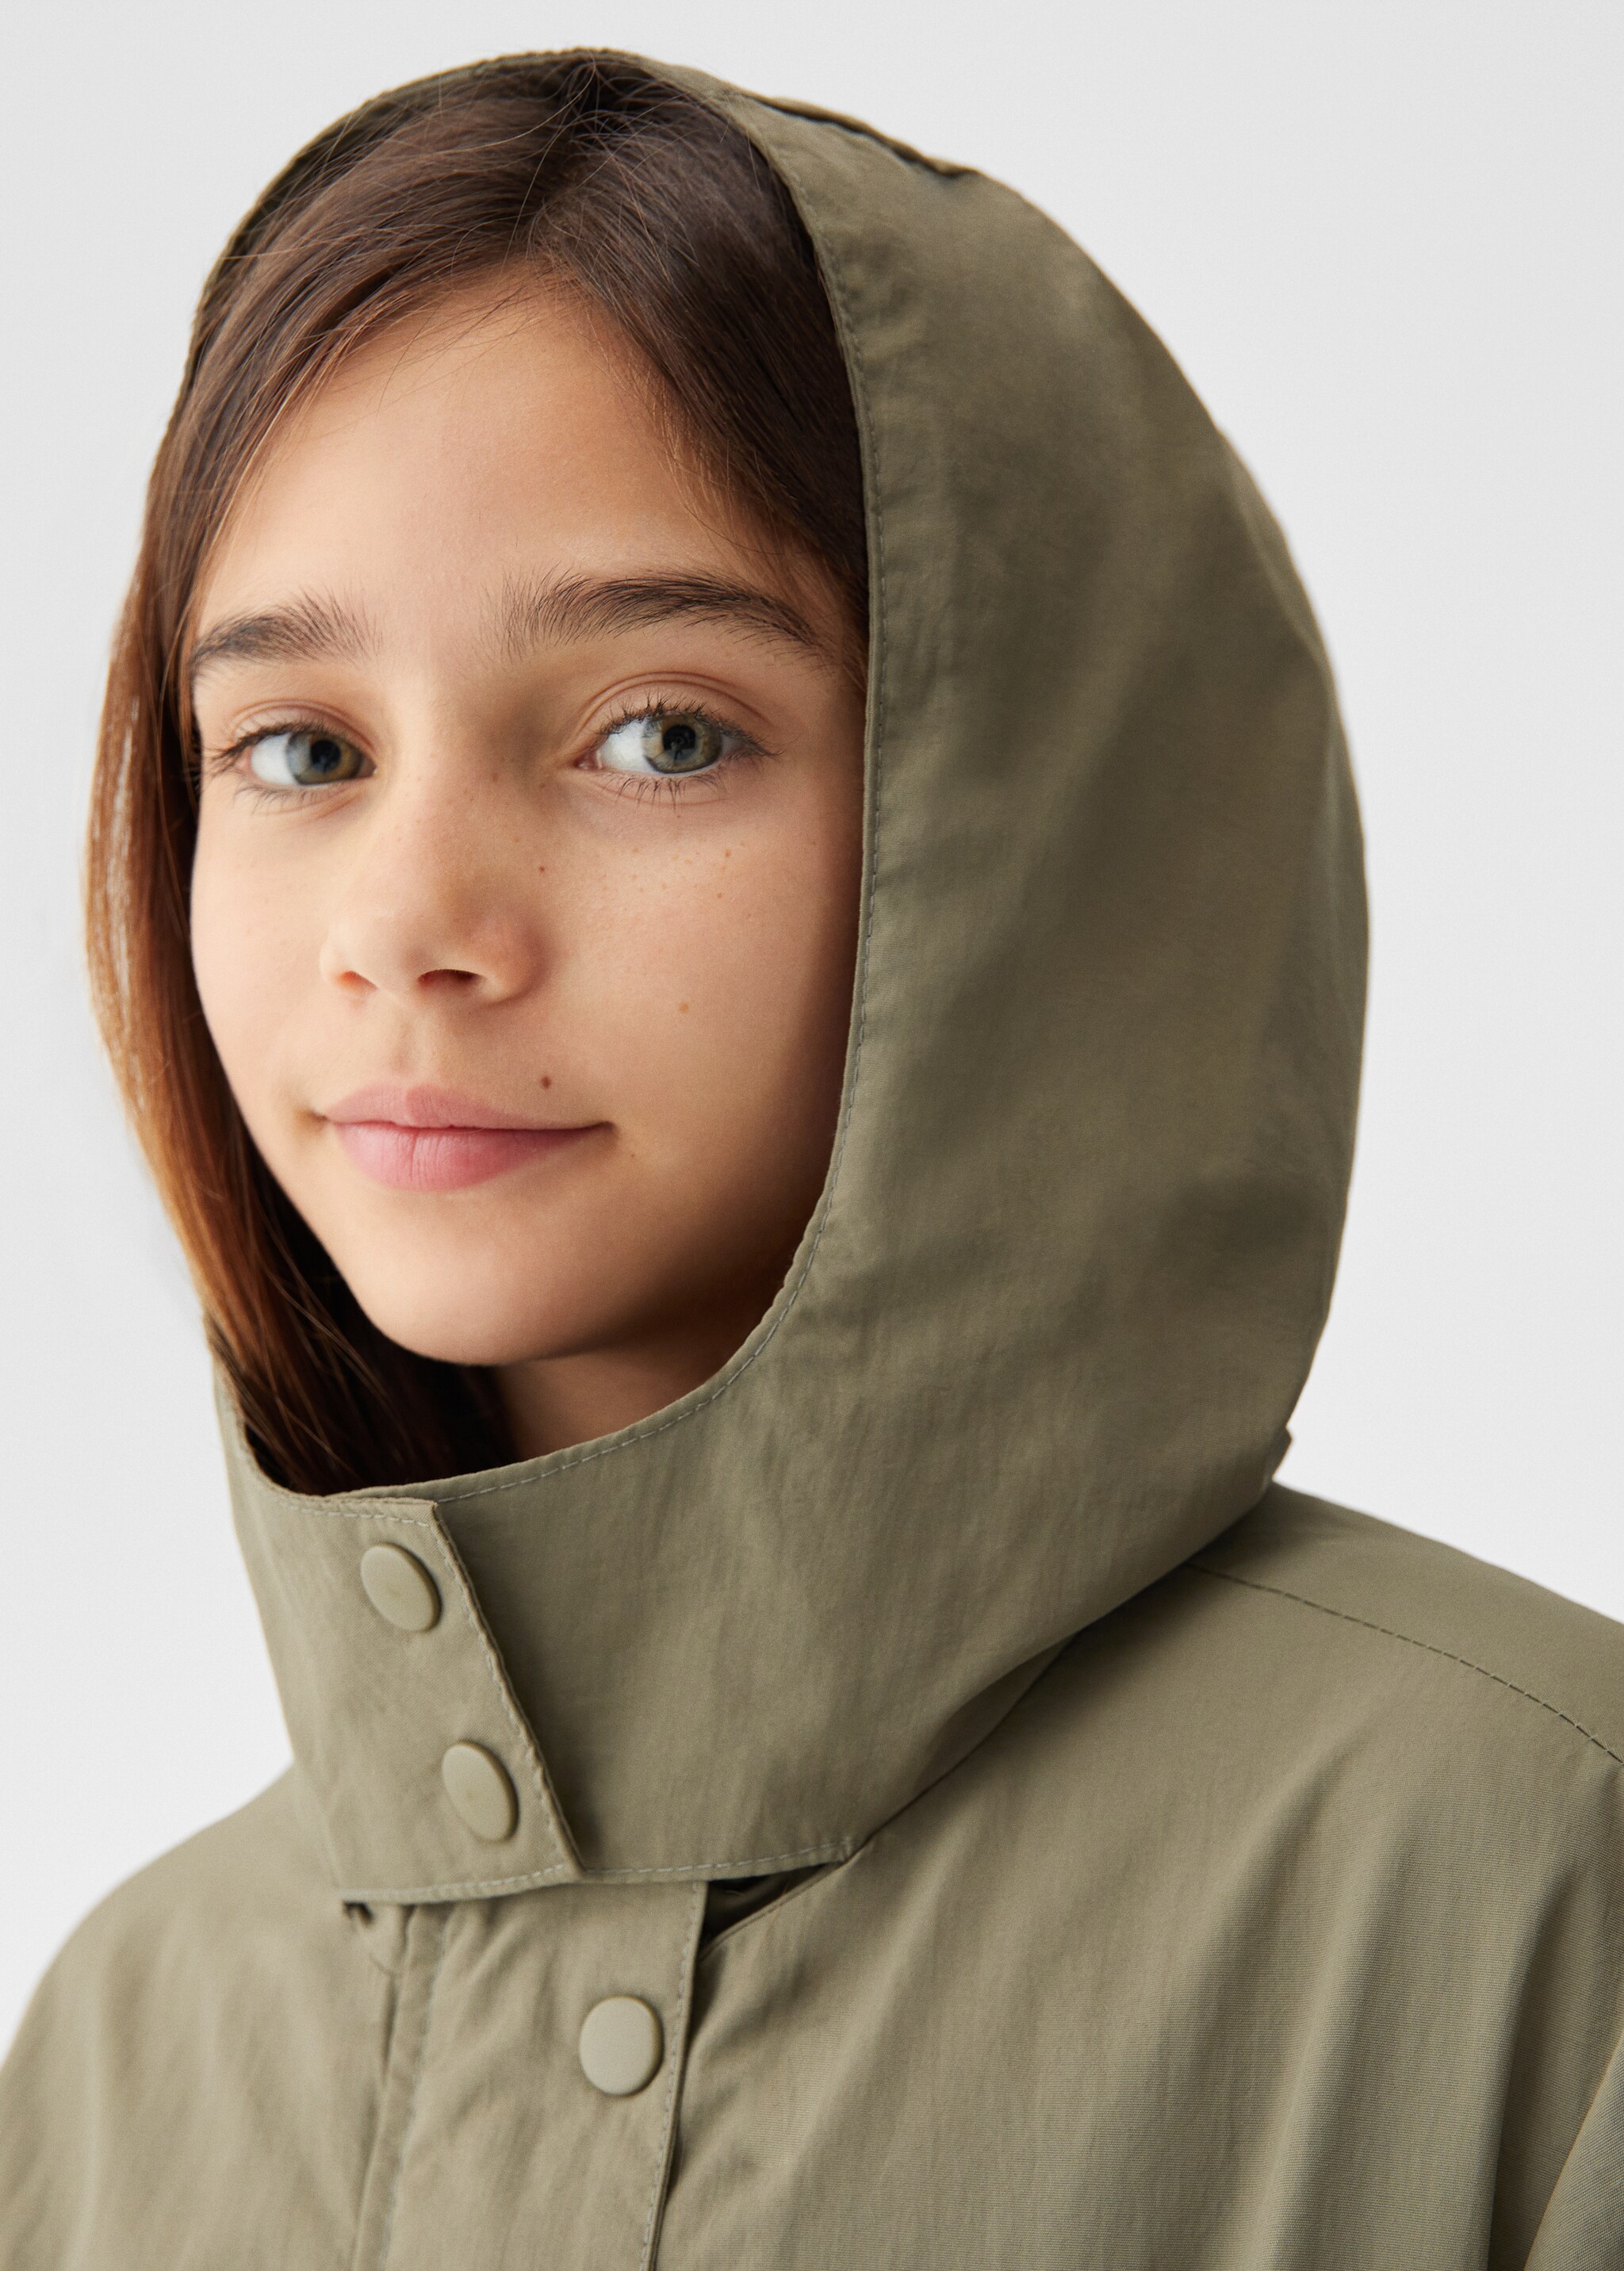 Hooded parka - Details of the article 1